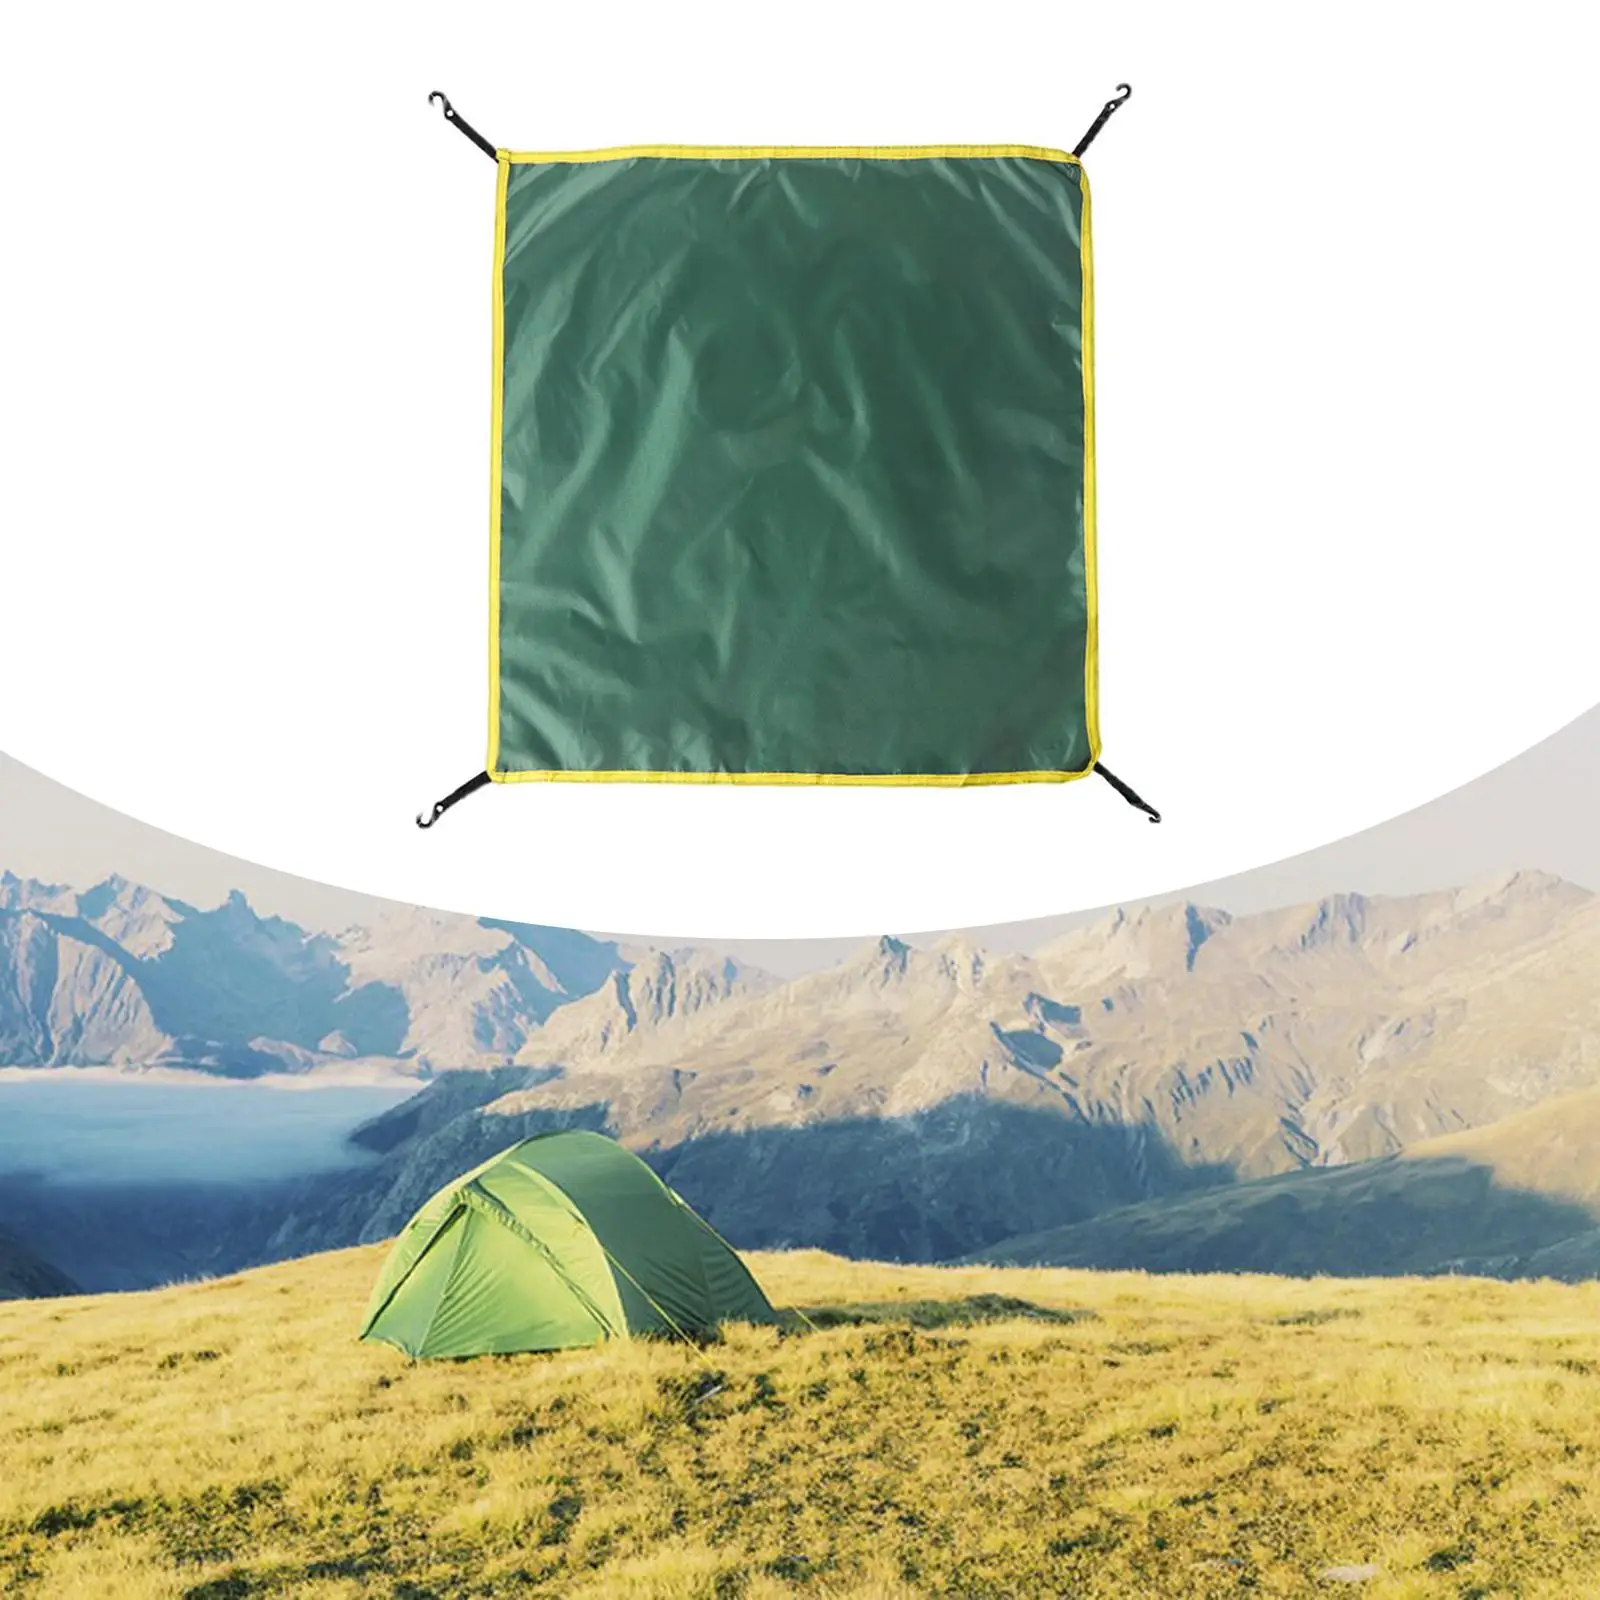 Rainfly Fits 3-4 Person Instant Tent Rainproof for Backpacking Travel Outdoor Supplies